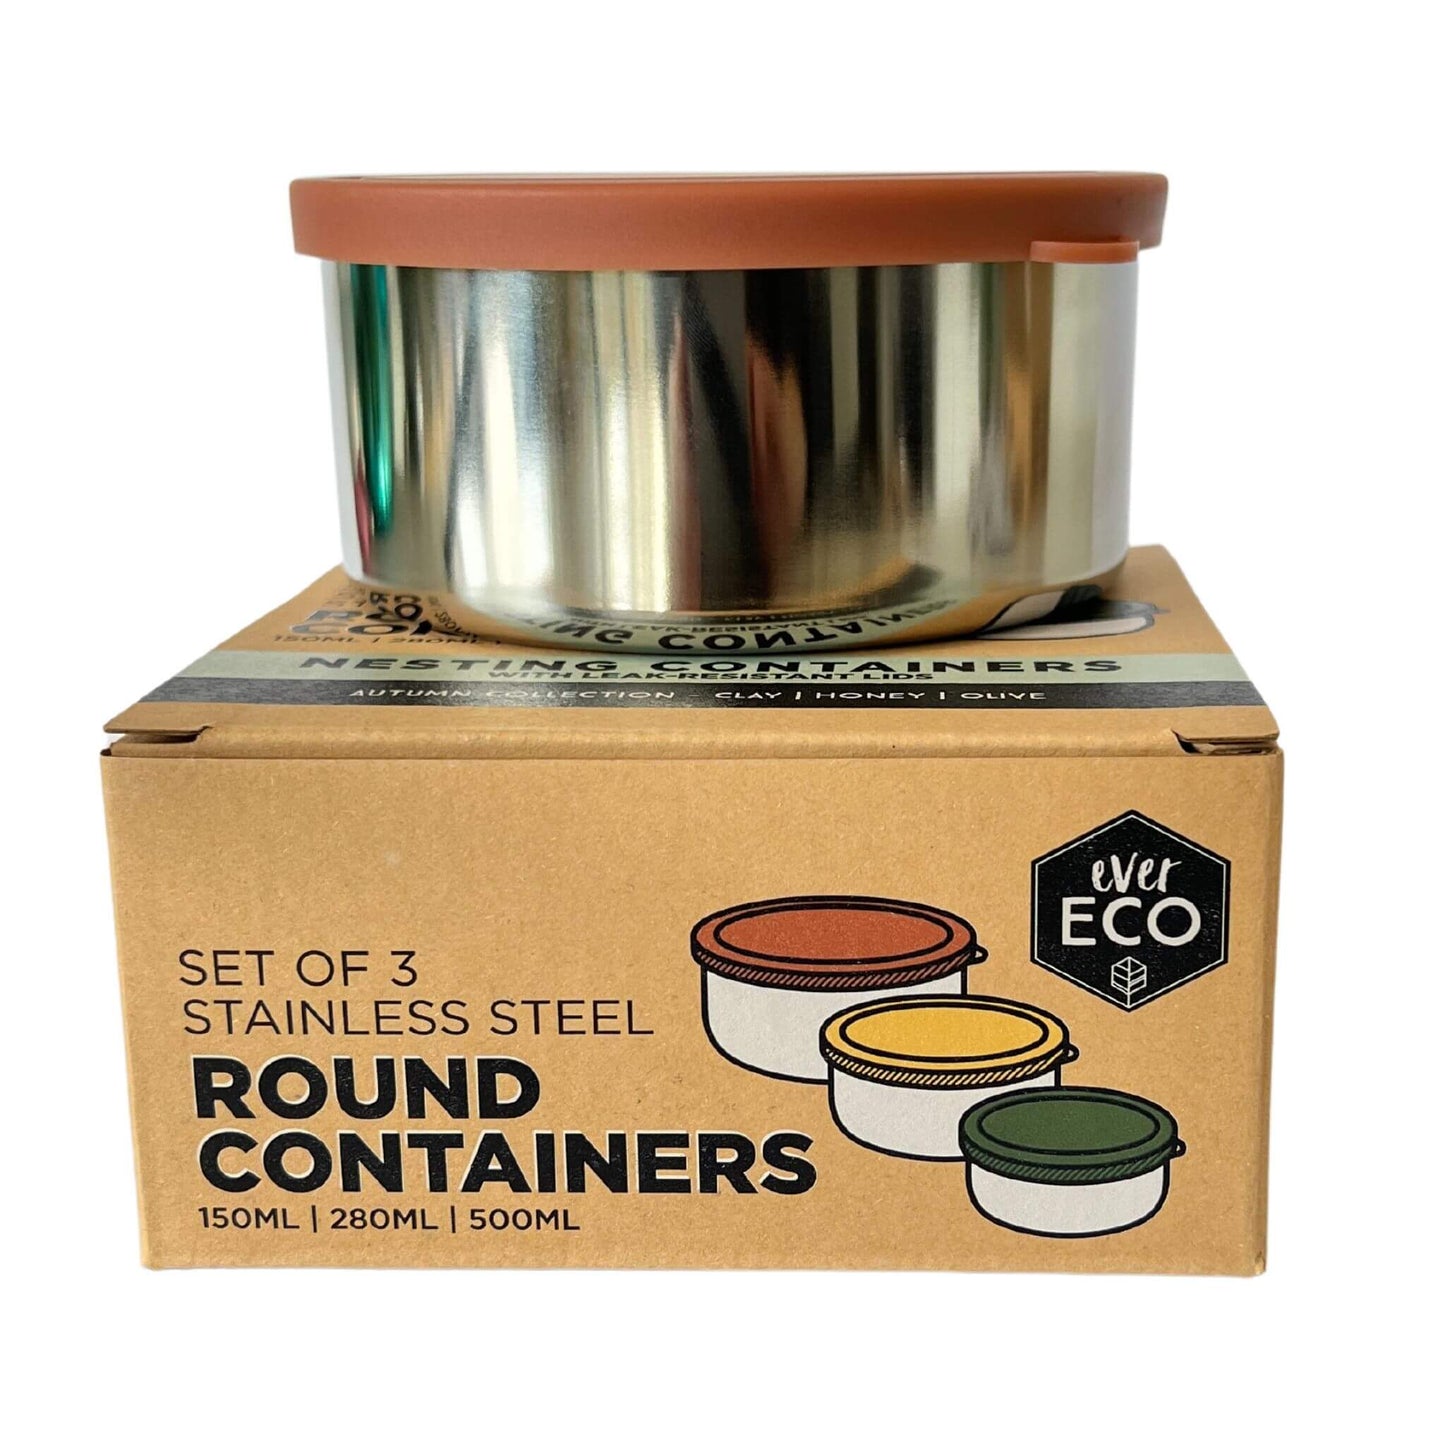 ever eco stainless steel nesting round containers set of 3 - clay, honey and olive in colour